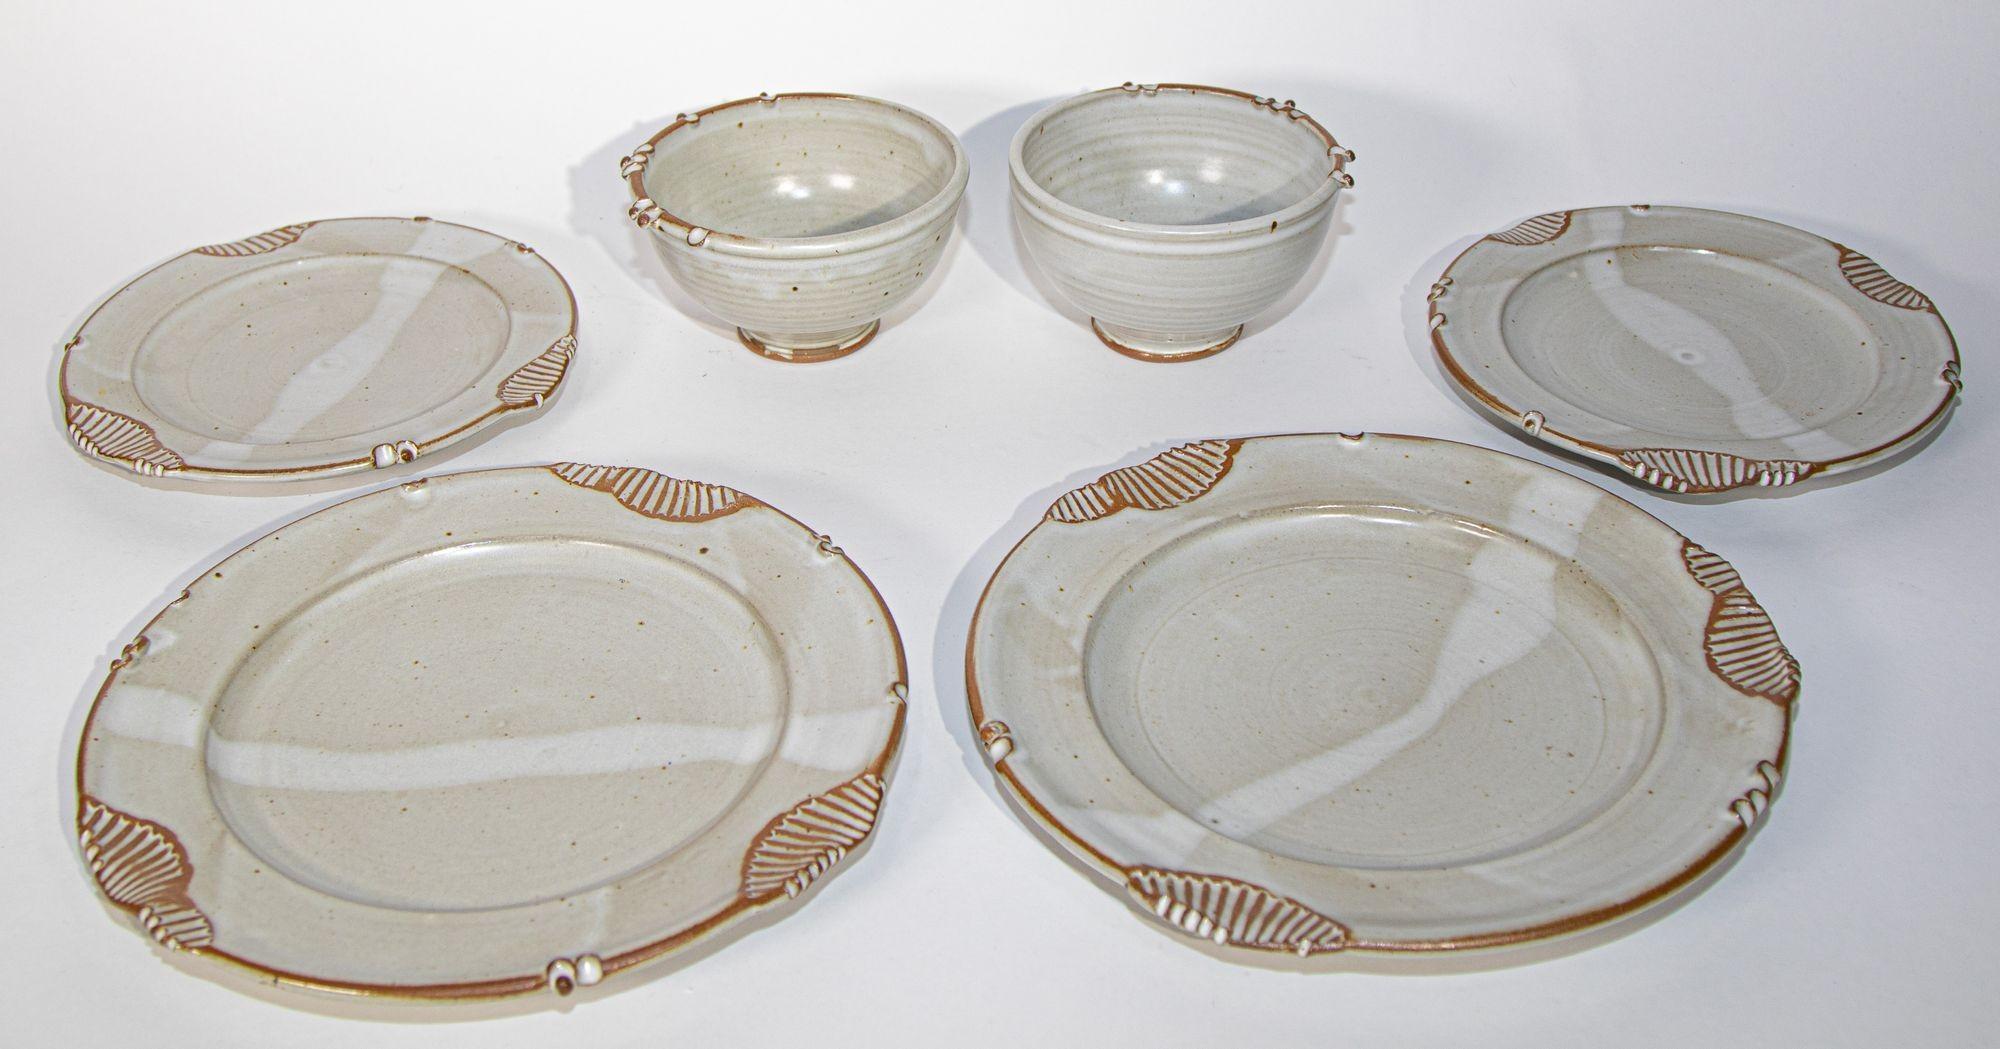 Paul Anthony Vintage Cream and Brown Stoneware Service Set of 6 For Sale 7